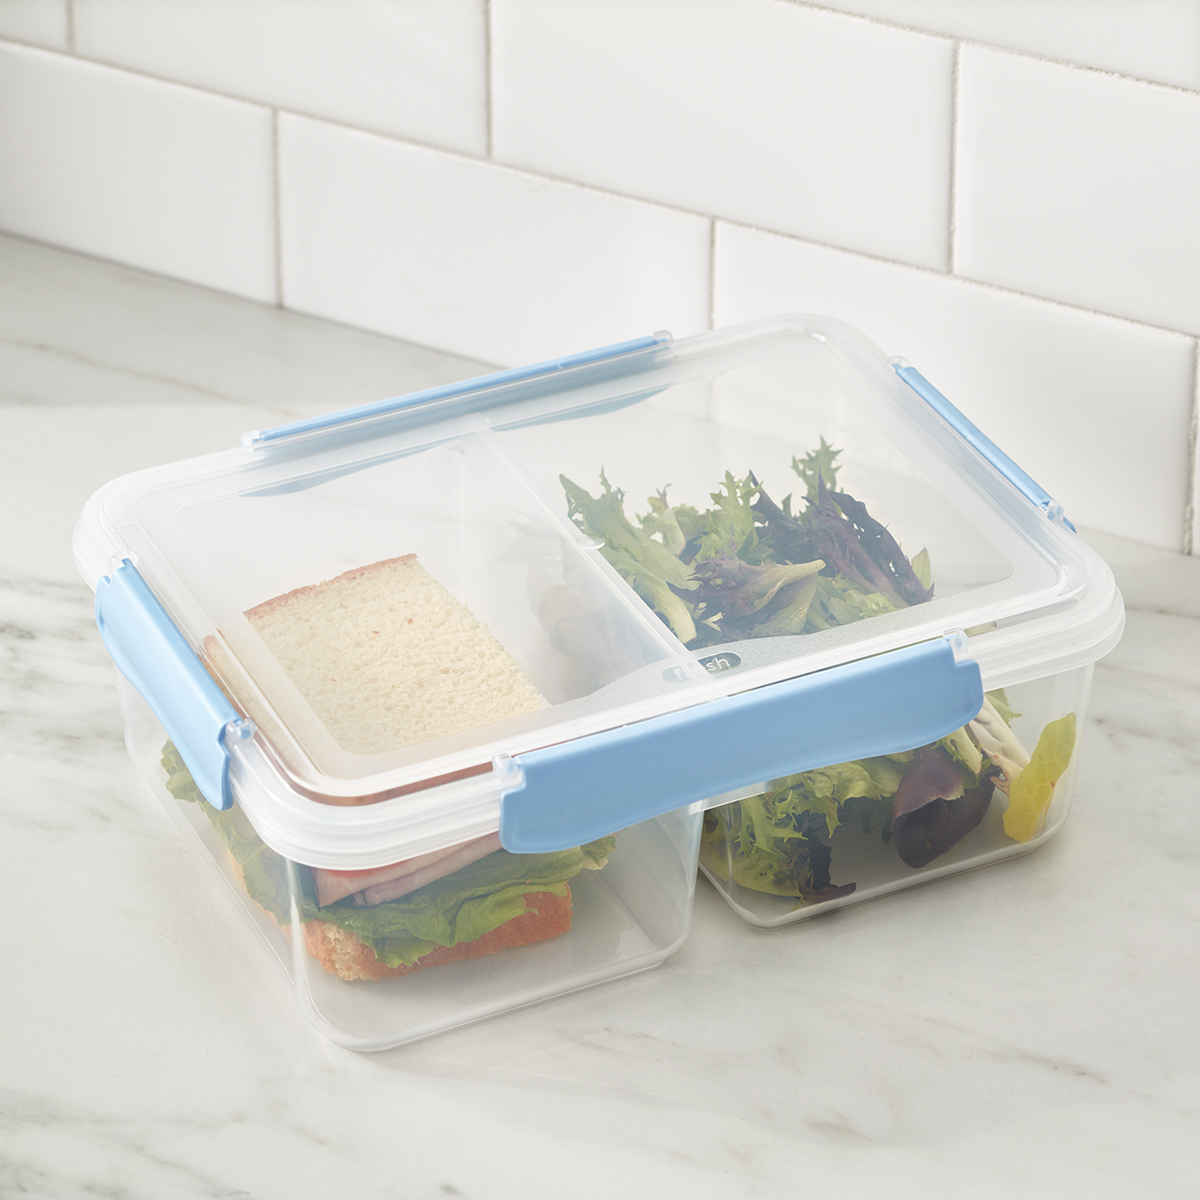 Plastic Food Containers with Light Blue Clips | The Container Store